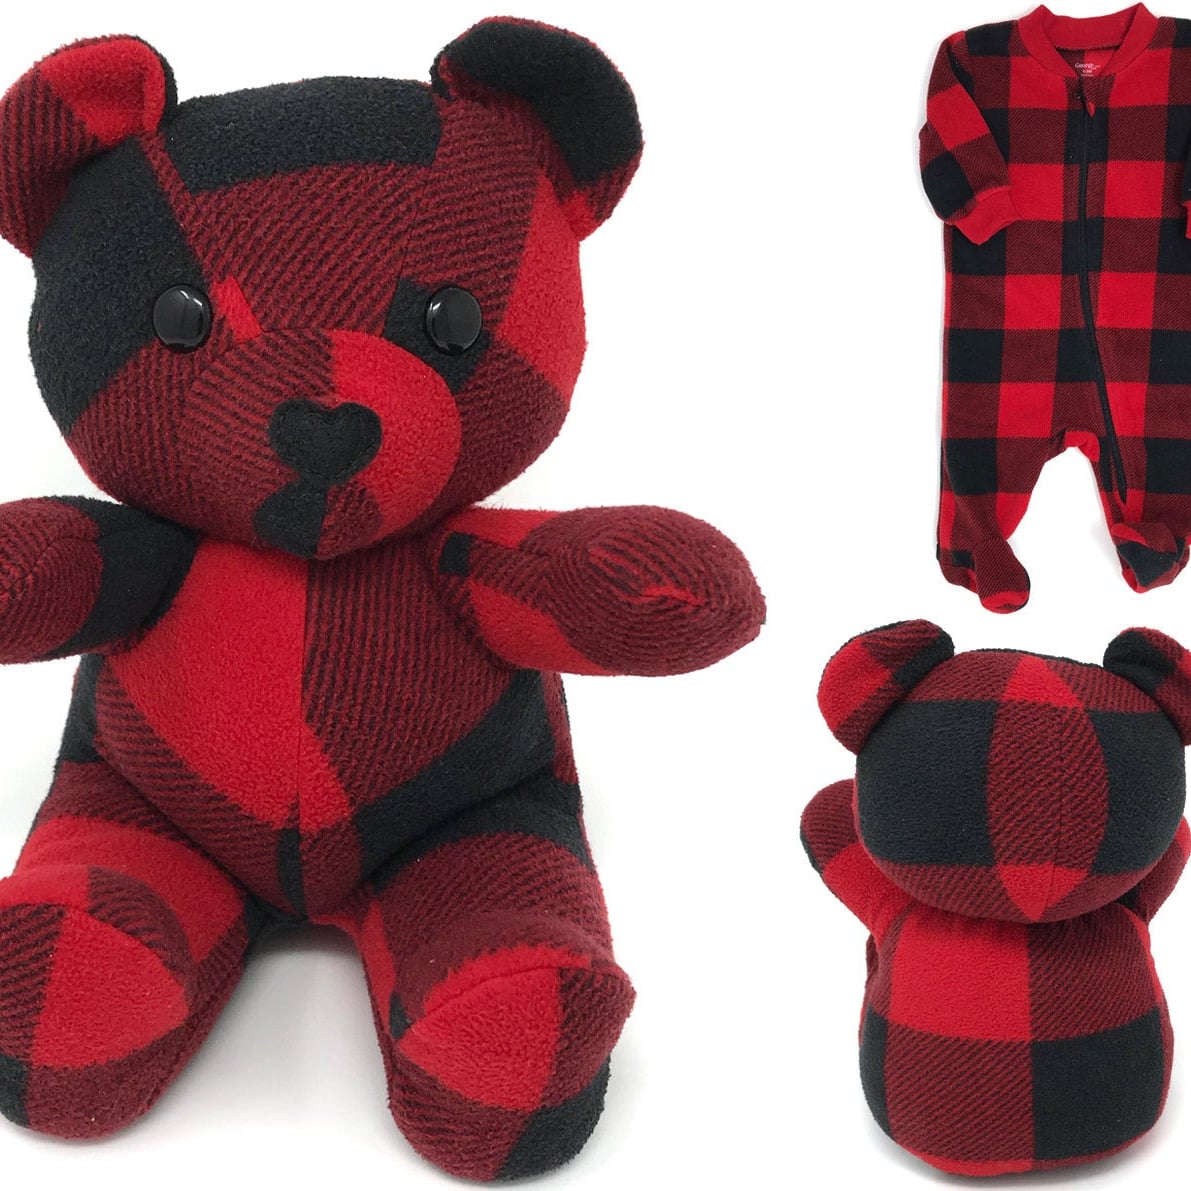 baby clothes made into teddy bears